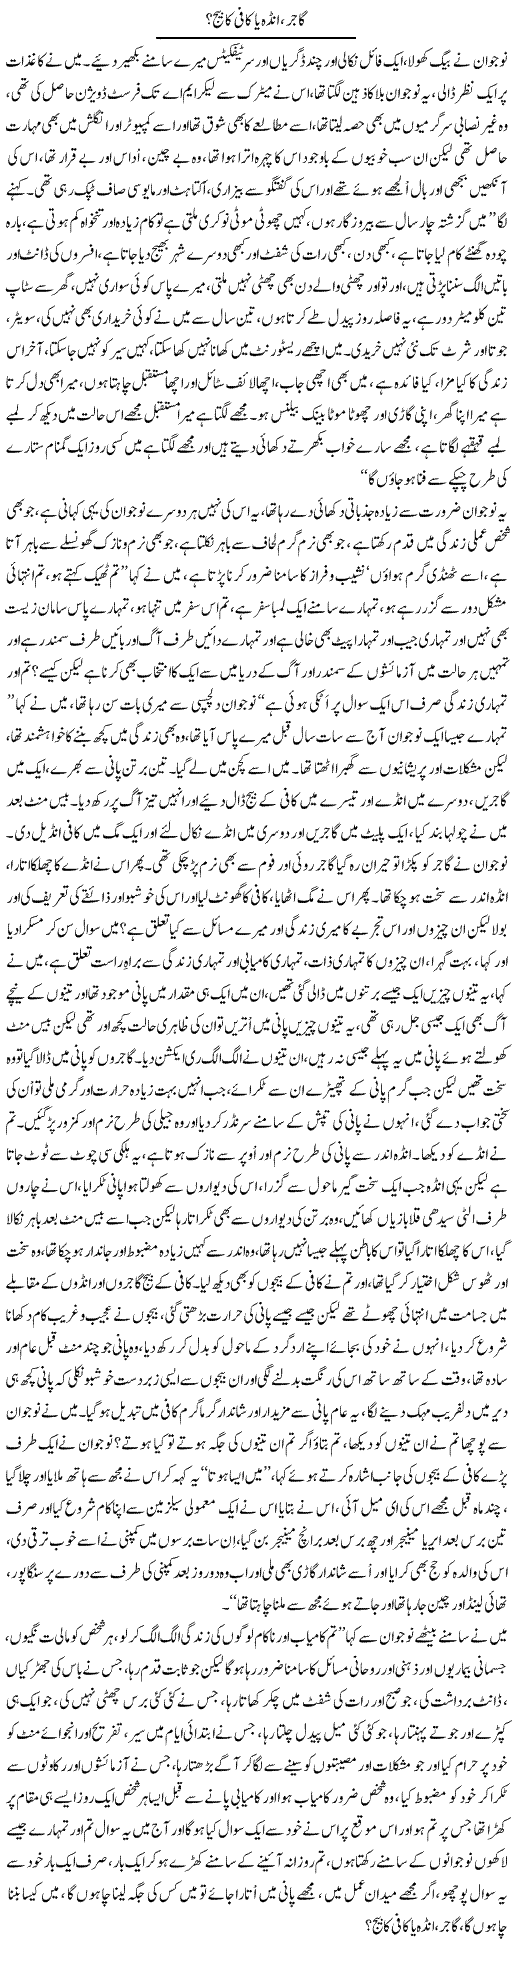 Carrot Egg Express Column Amad Chaudhry 9 January 2011